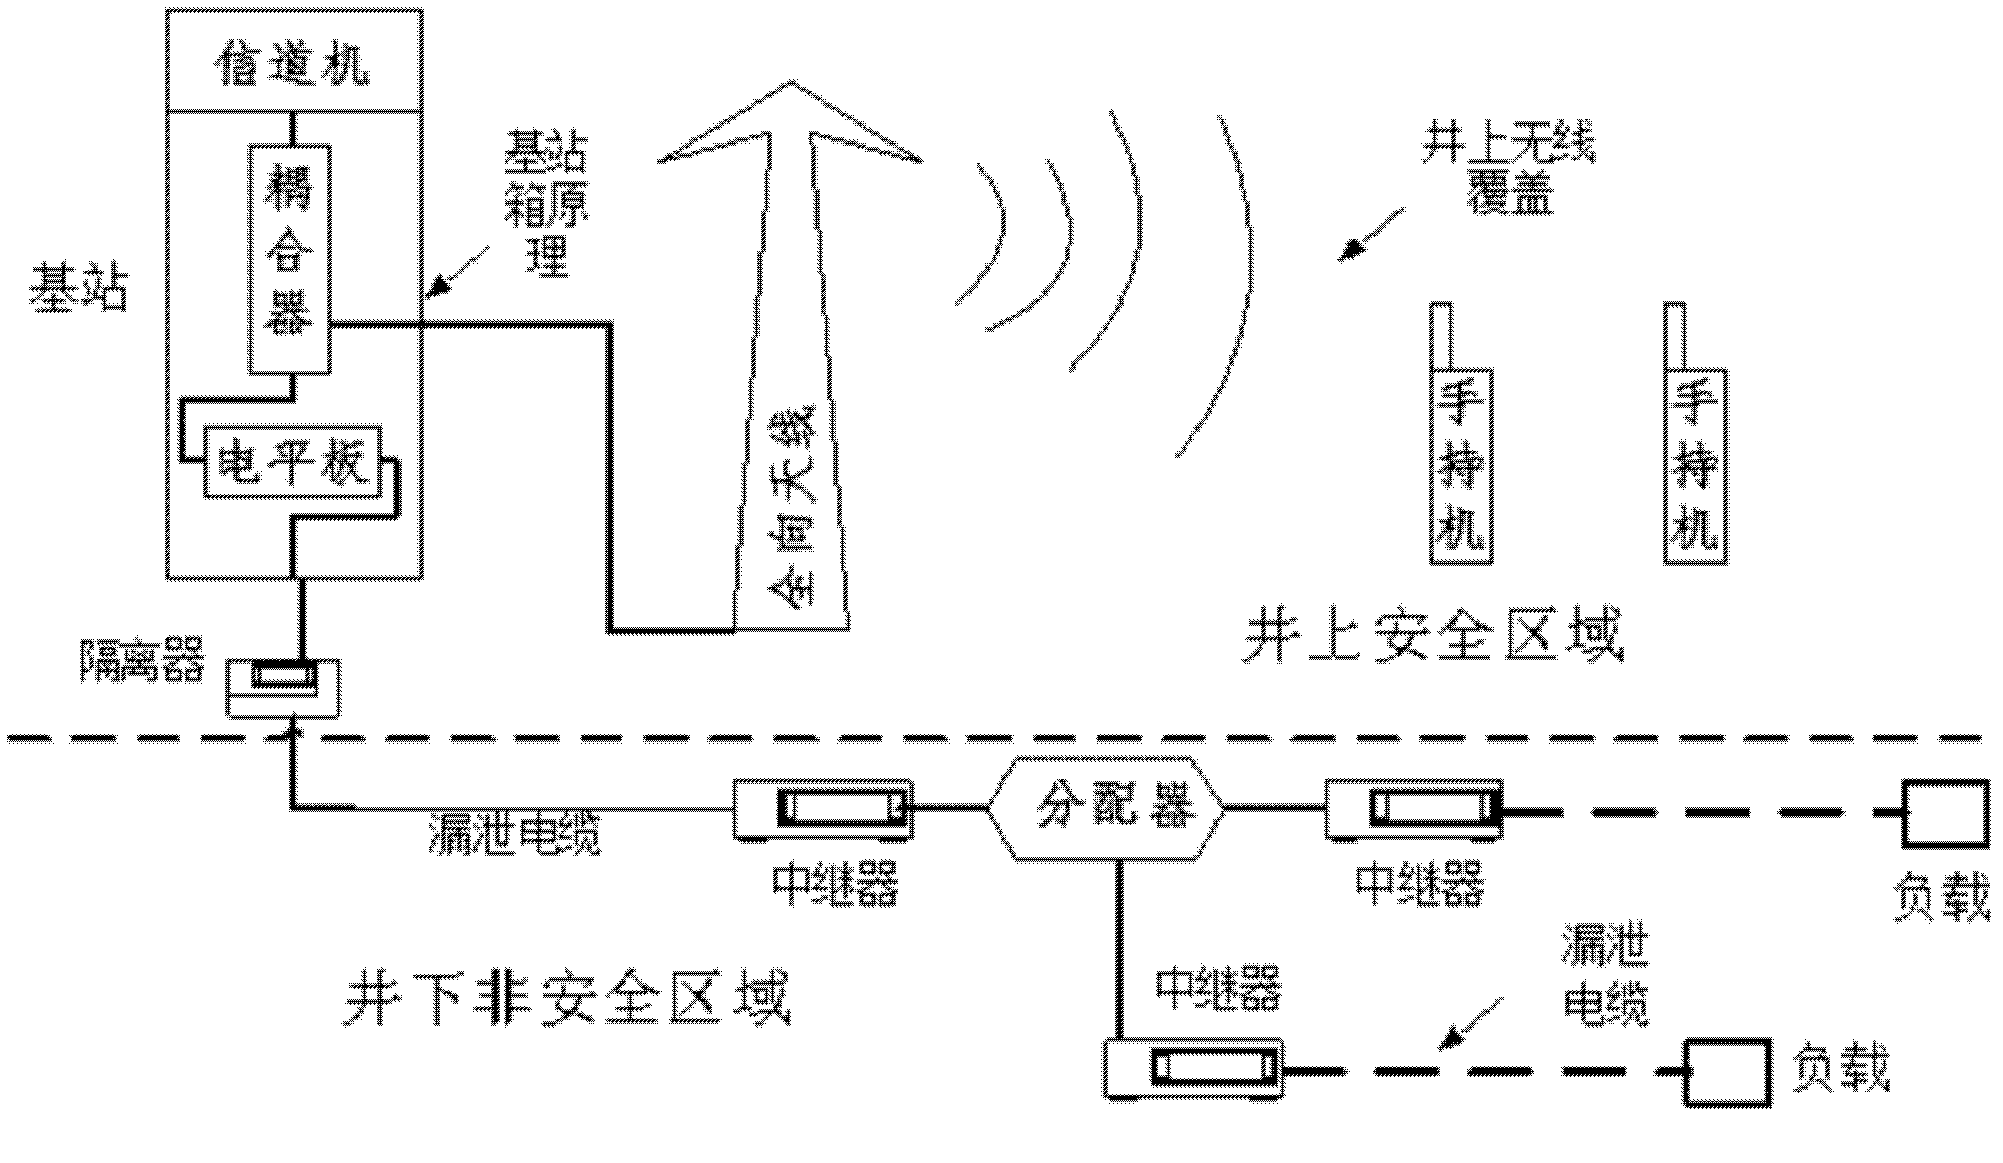 Communication system consisting of desk-top ground single-channel base station and walkie talkies